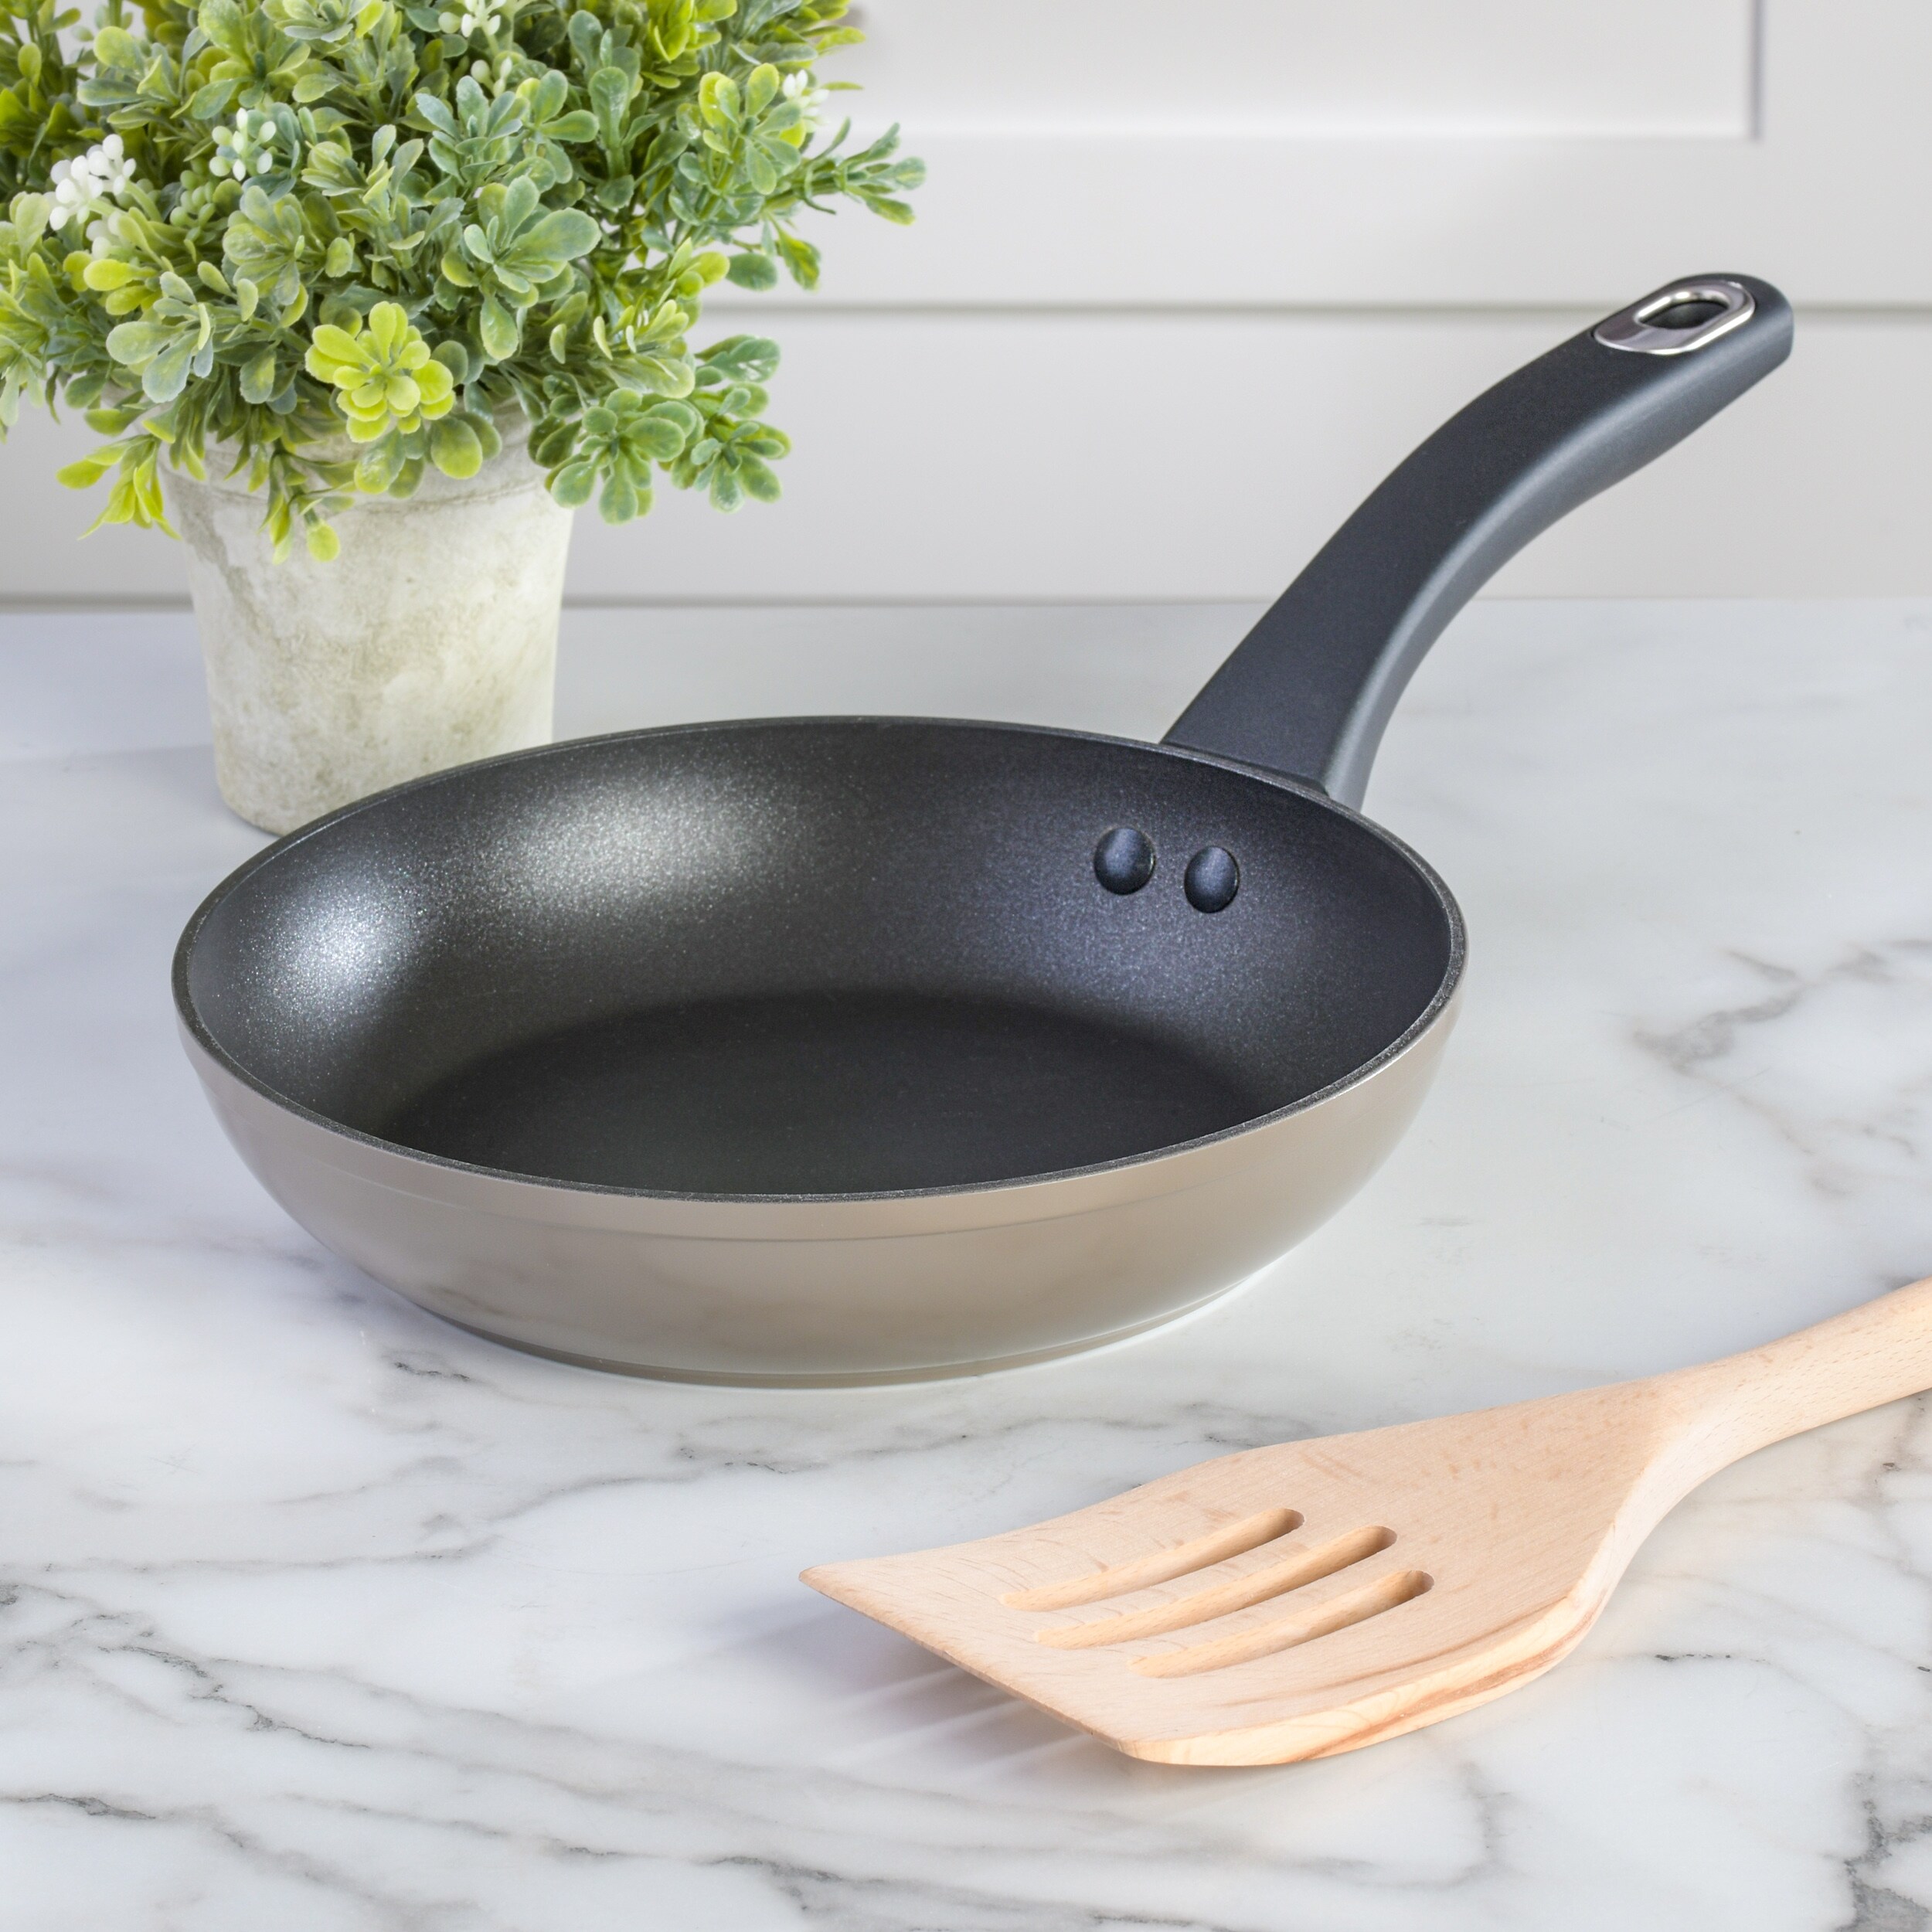 https://ak1.ostkcdn.com/images/products/is/images/direct/c60a666caf8b0977a3e979b1a744c3038696ed1f/Martha-Stewart-Everyday-Bowcroft-Aluminum-Nonstick-Frying-Pan.jpg